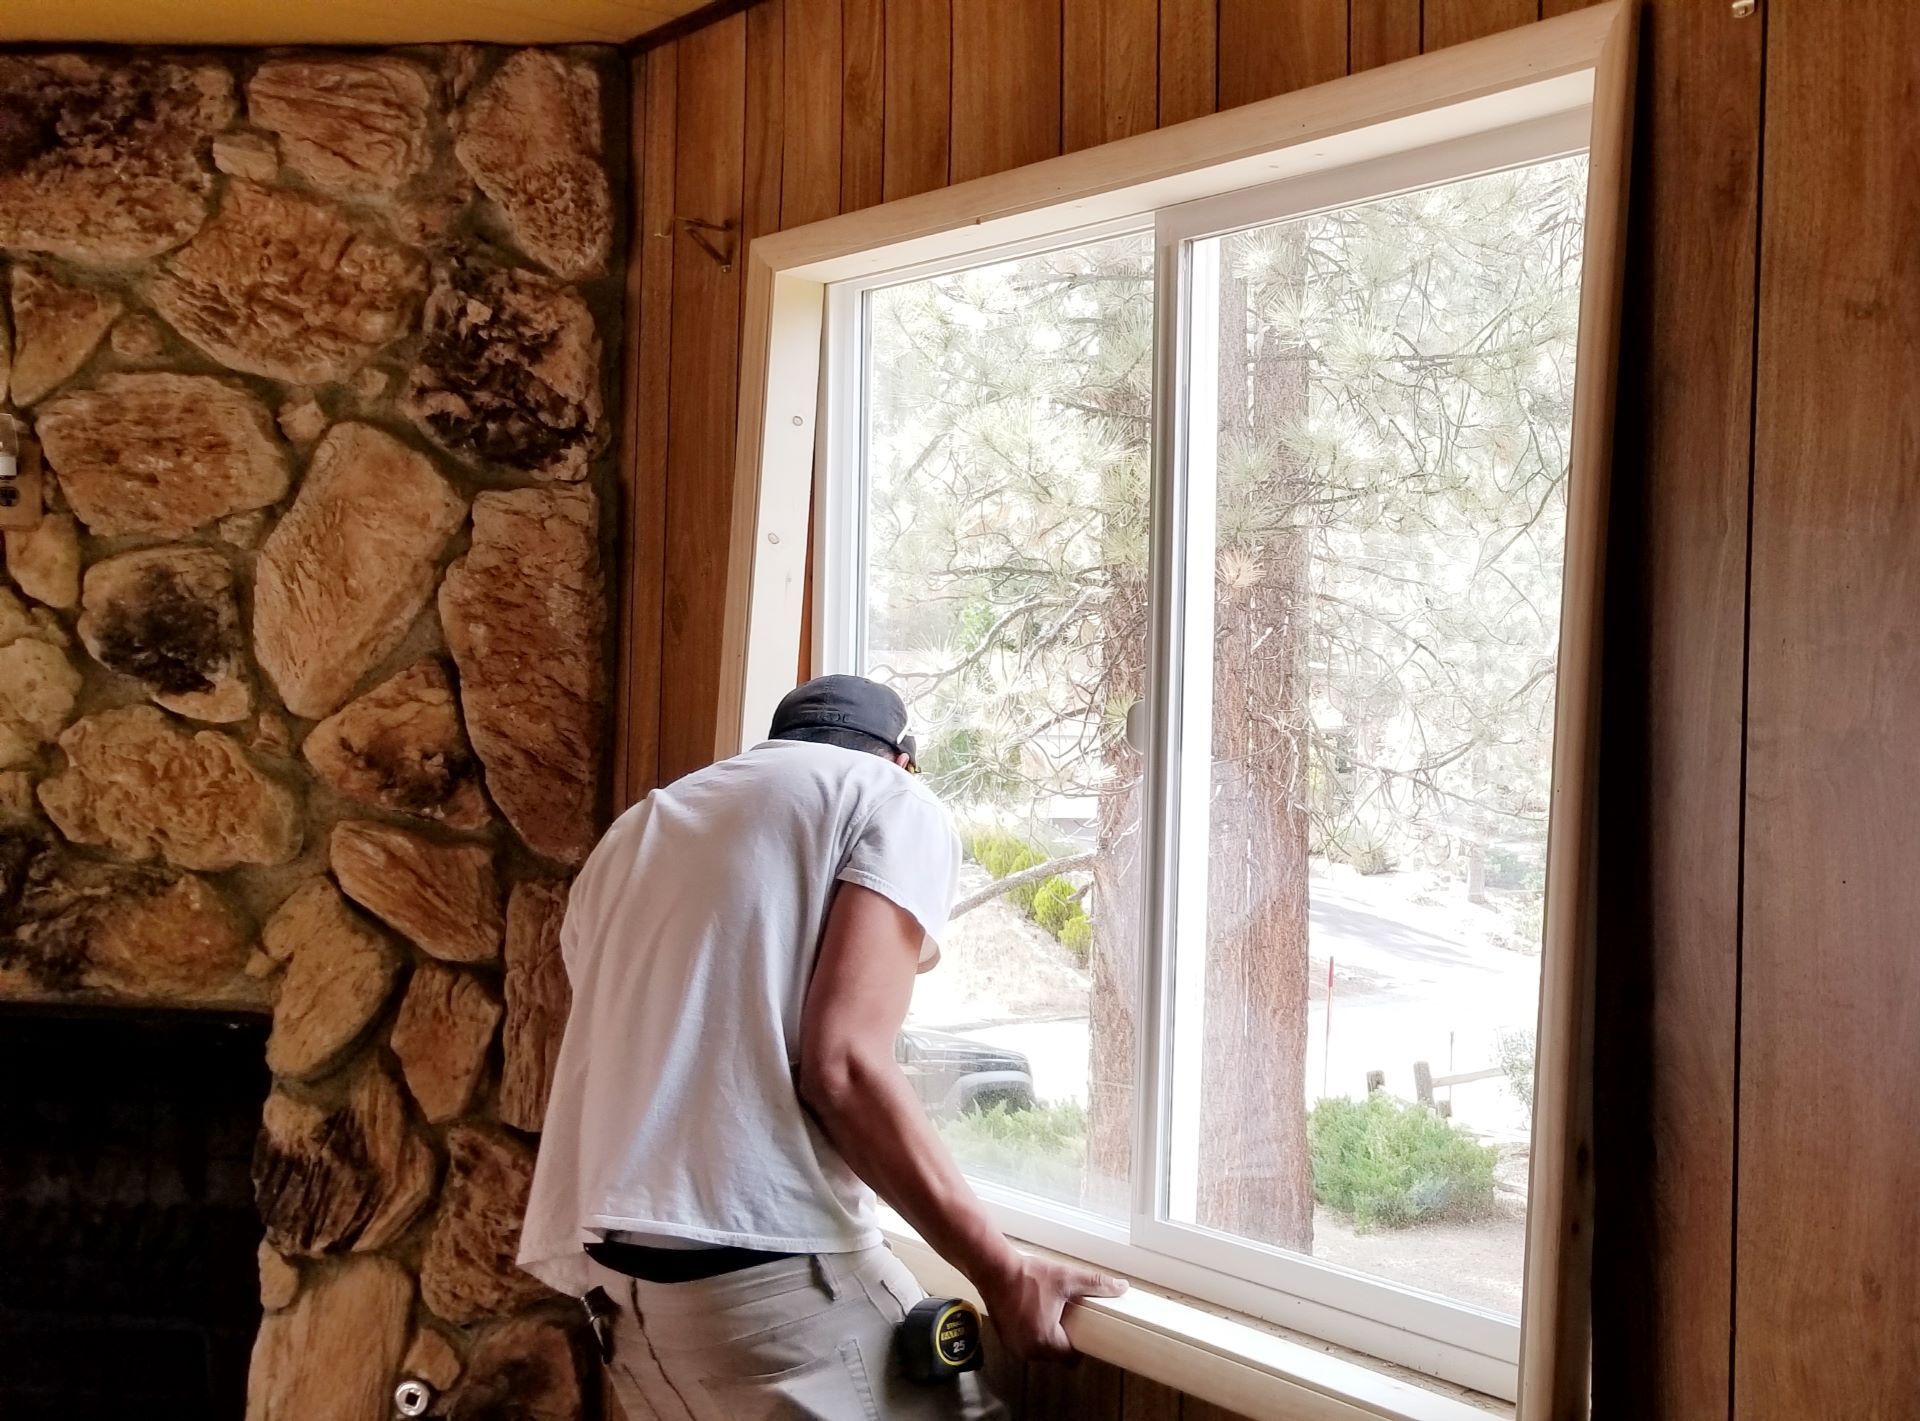 A window installer adds a new wood window sill and frame